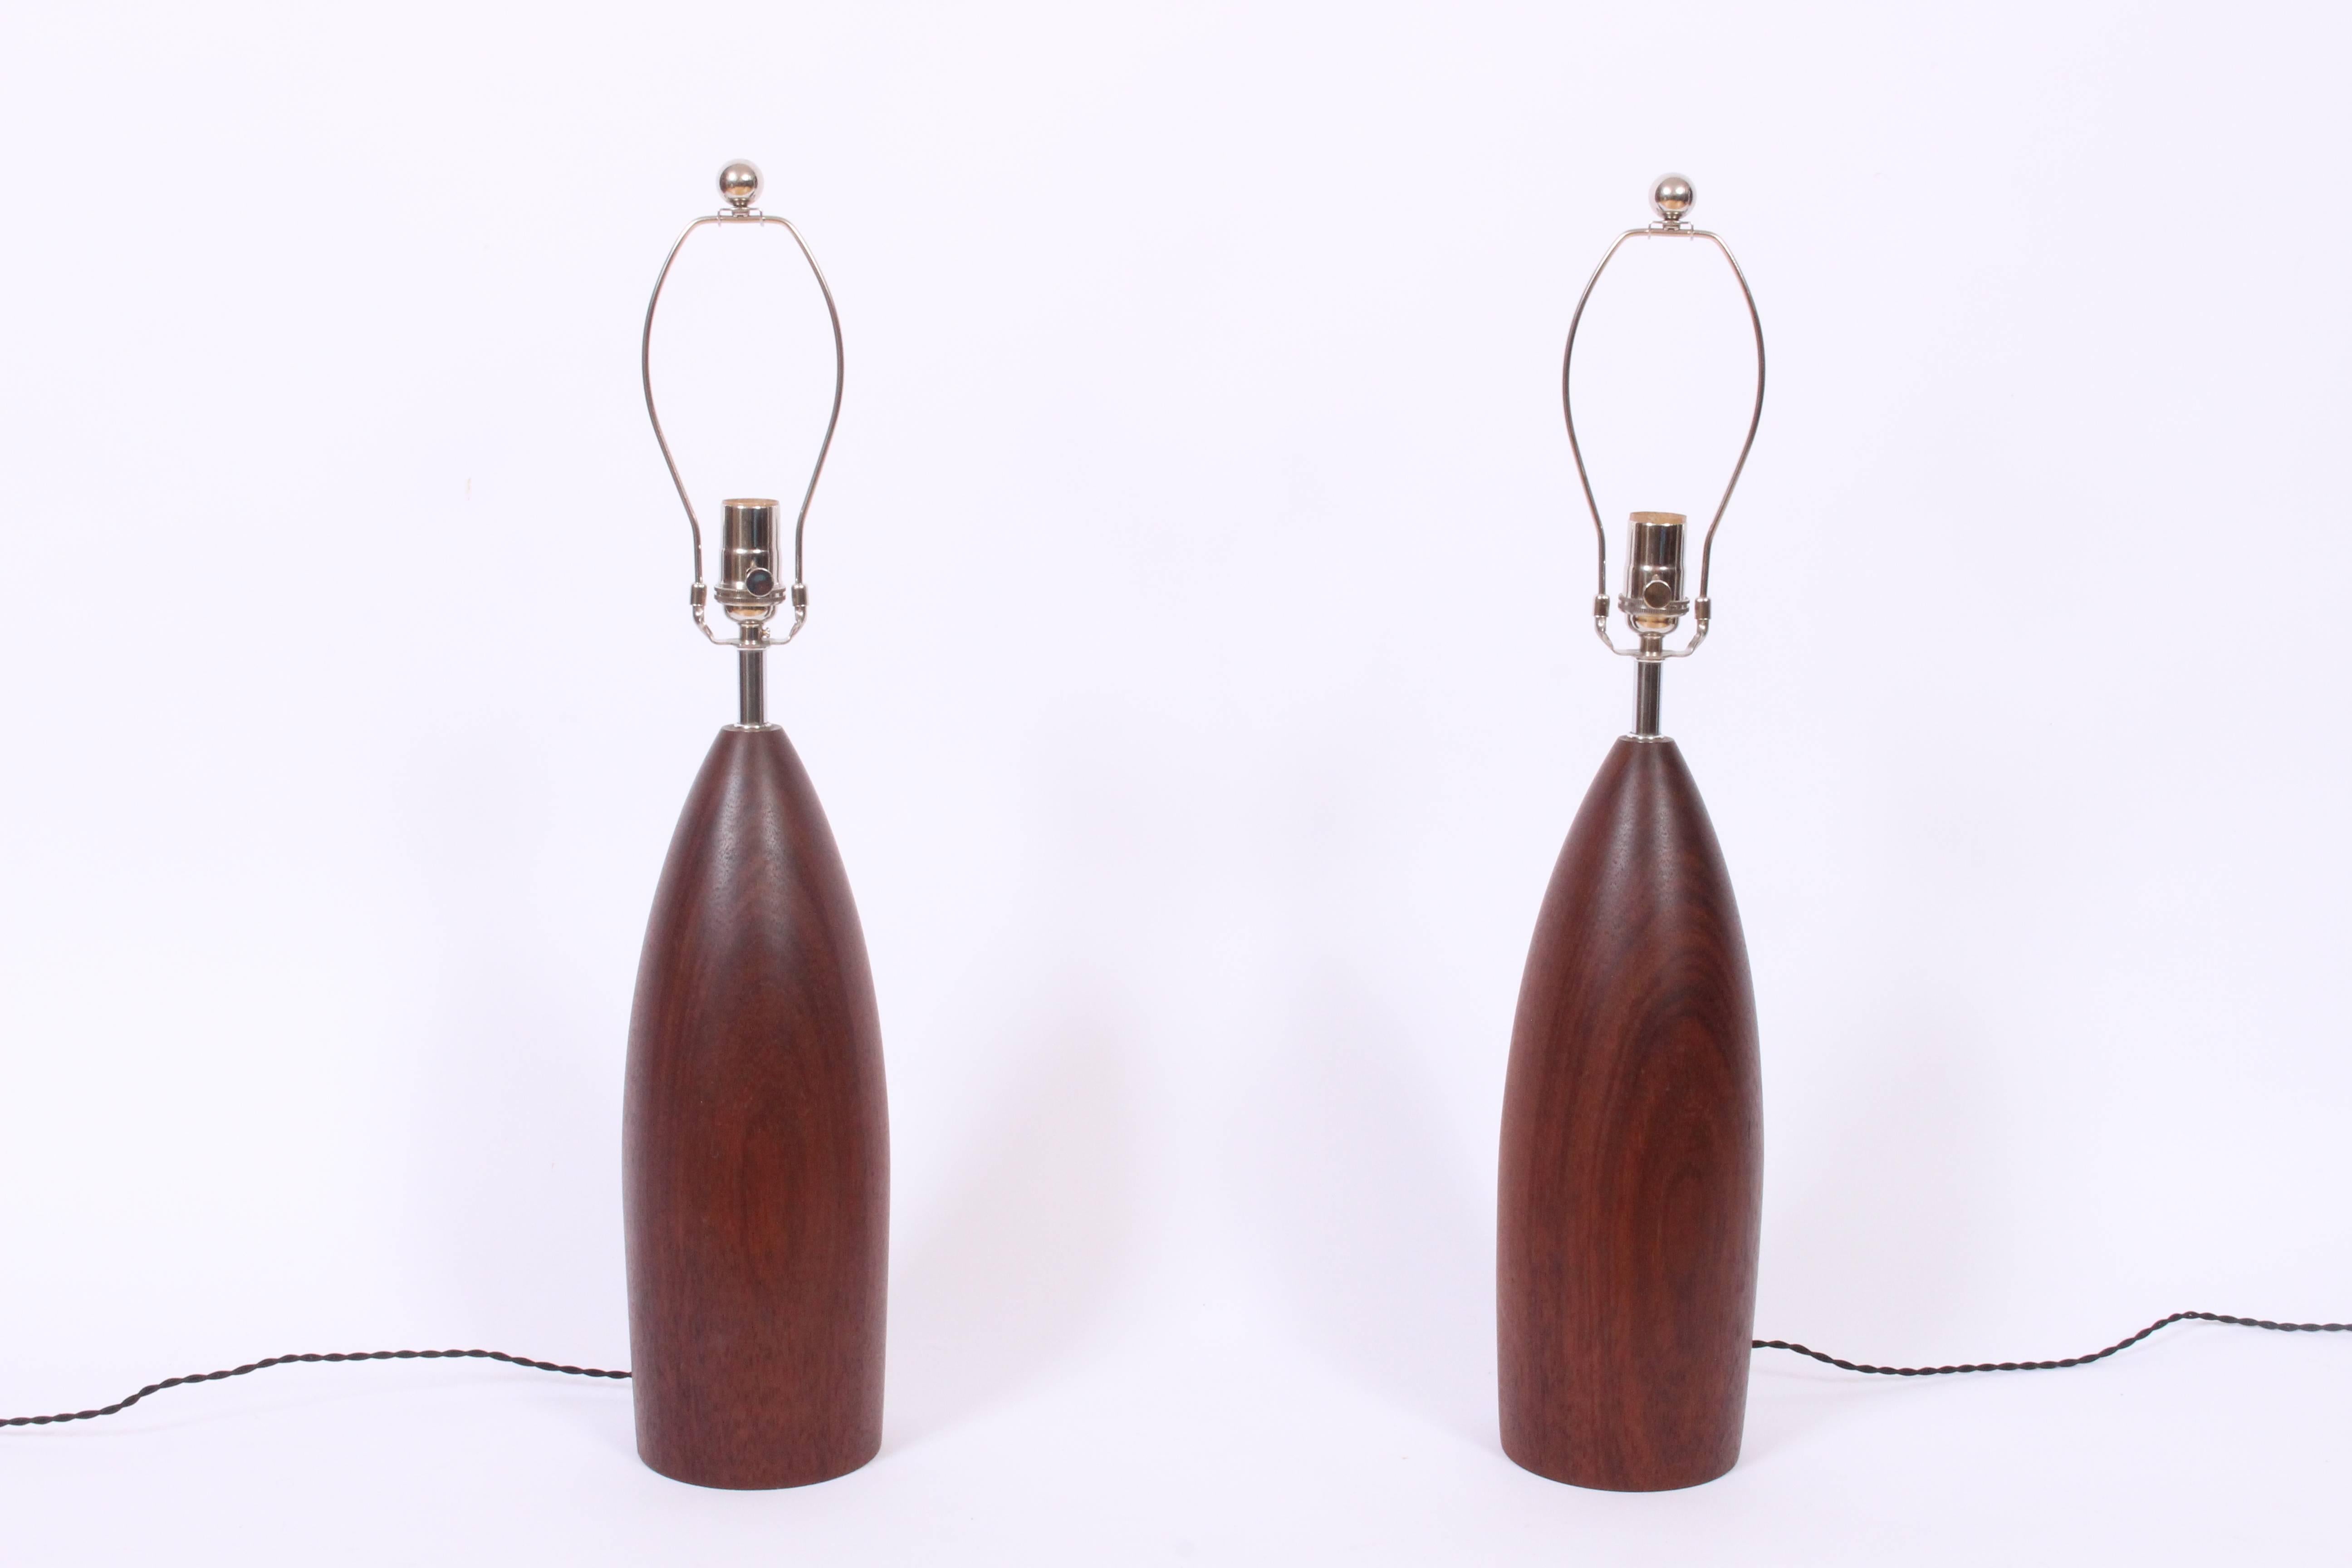 Large Pair of Scandinavian Modern ESA attributed solid Deep Teak Table Lamps. Featuring a smooth turned bullet form with small footprint. 21 H to top of socket. Shades shown for display (9.5H x 12D top x 13D bottom). Sculptural. Statement lighting.